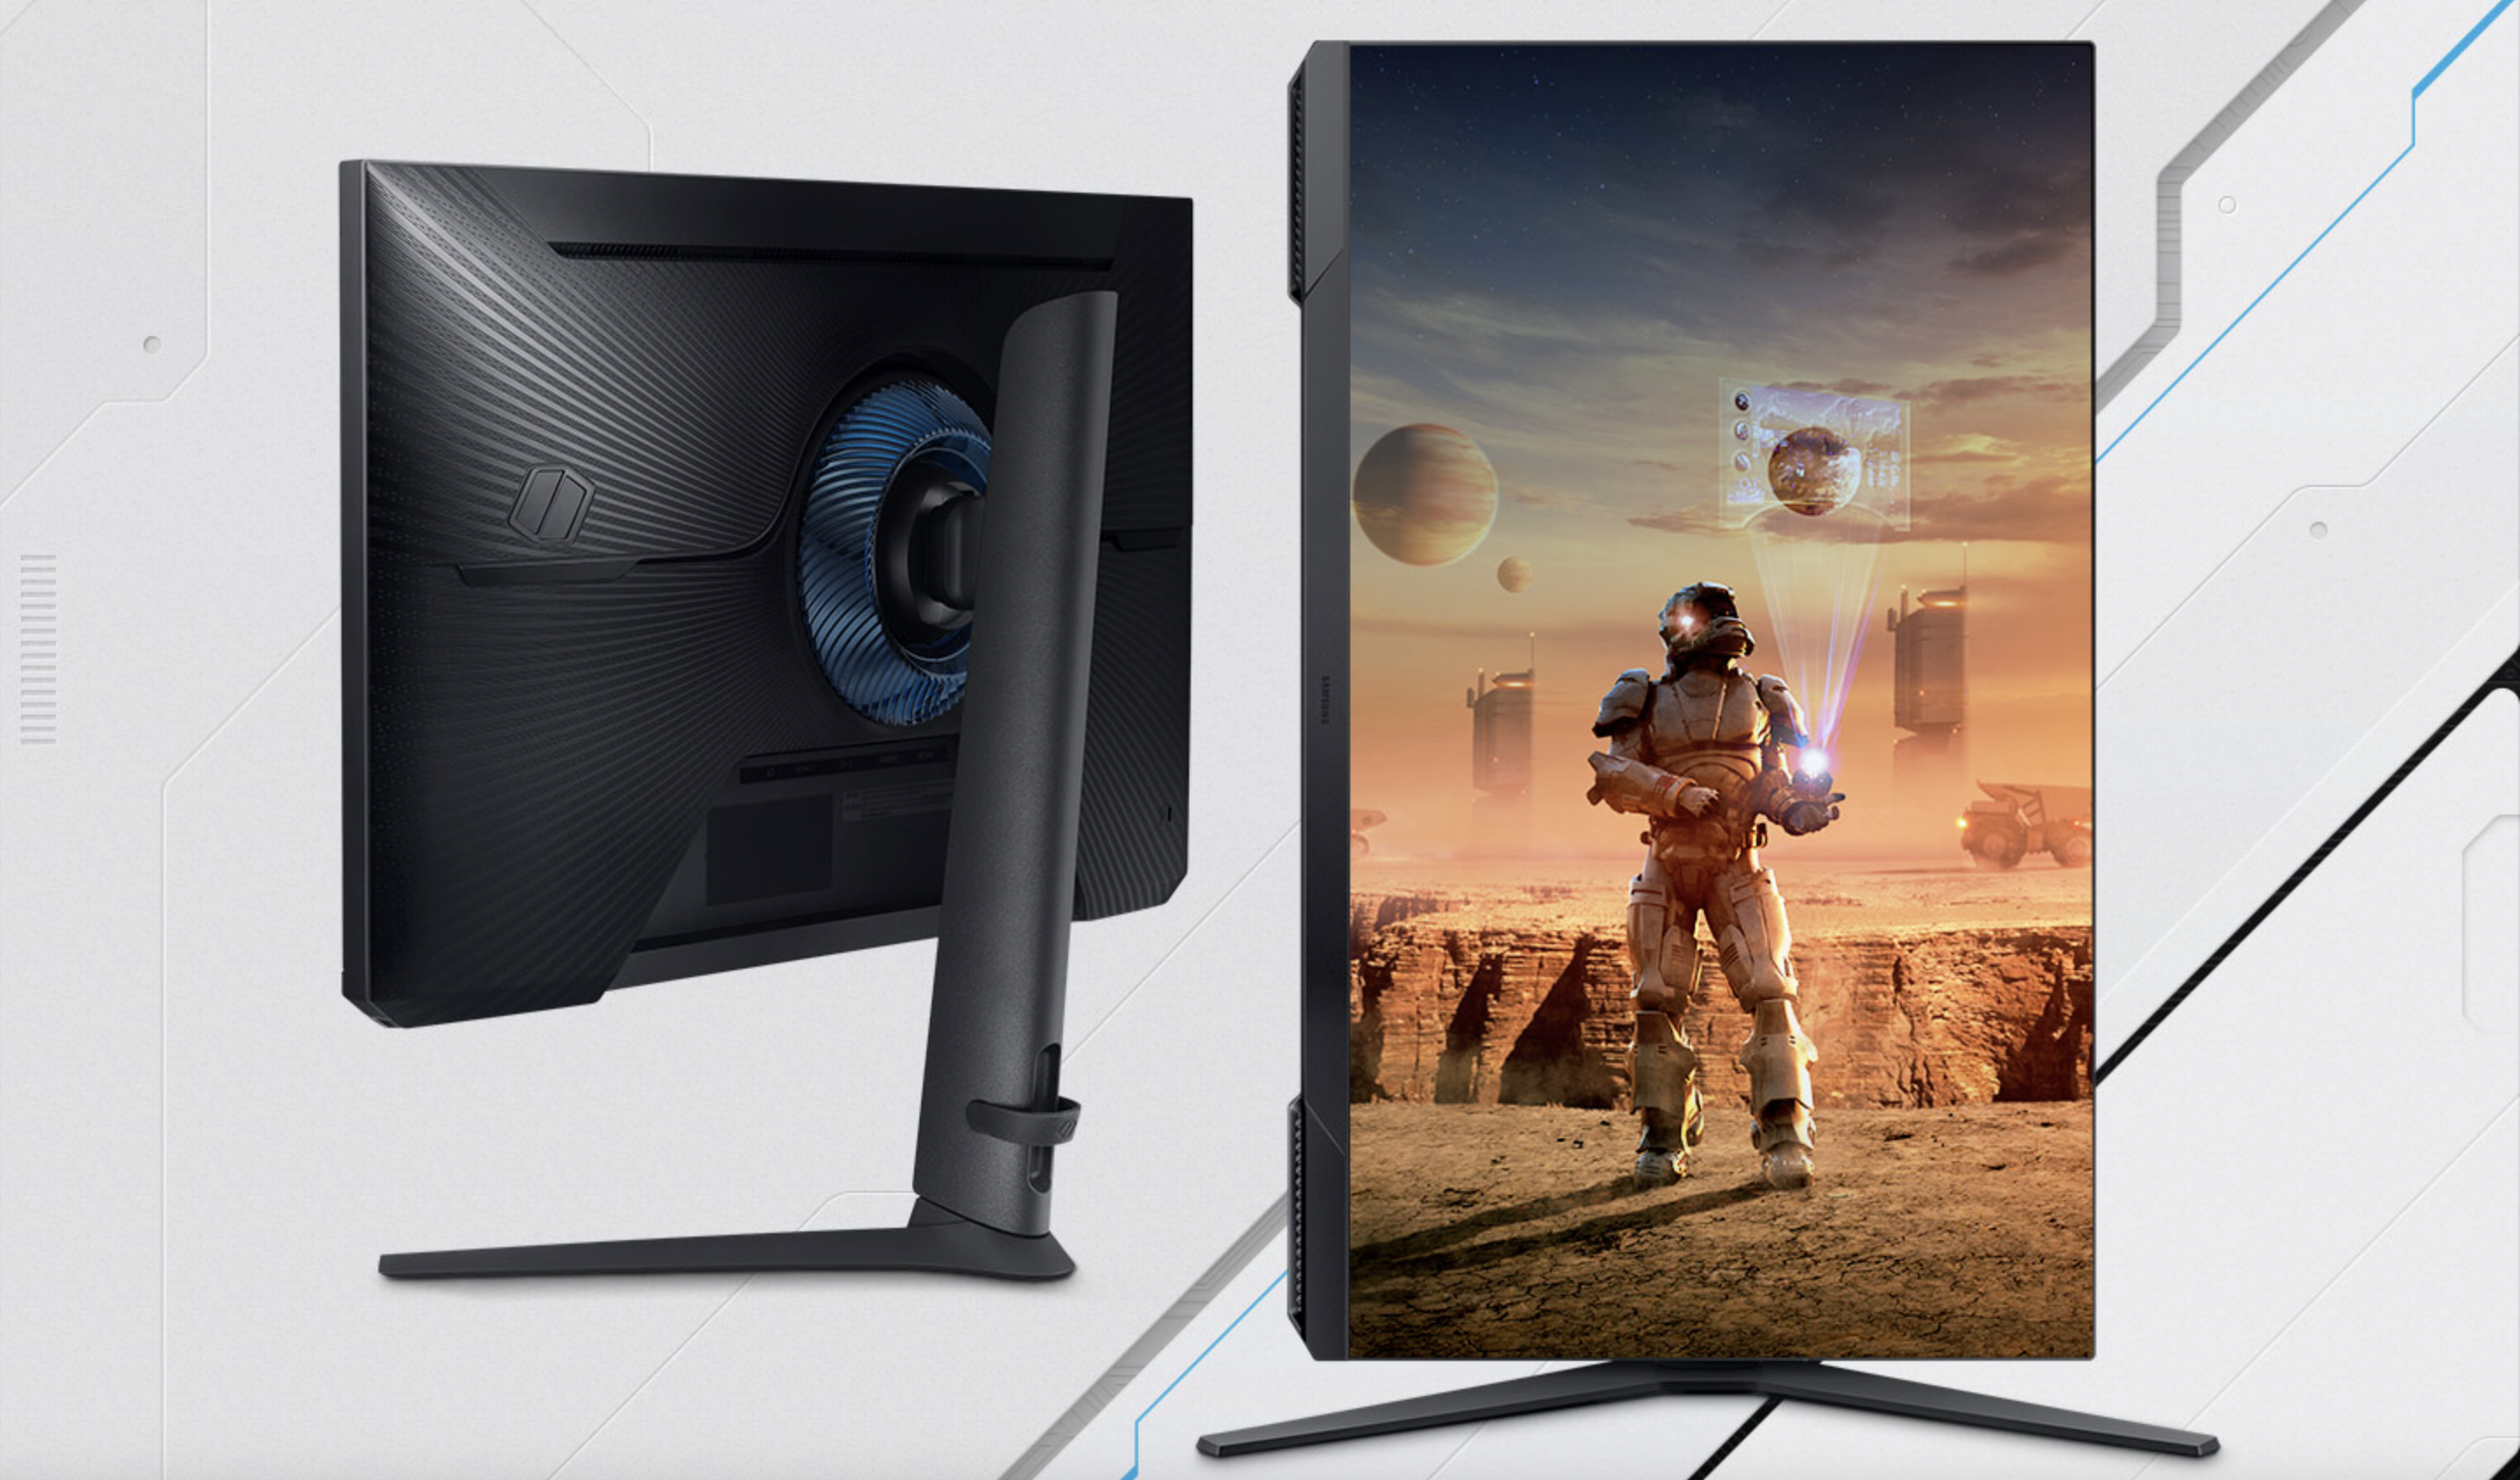 Get the Odyssey G3 gaming monitor for 25% off - SamMobile